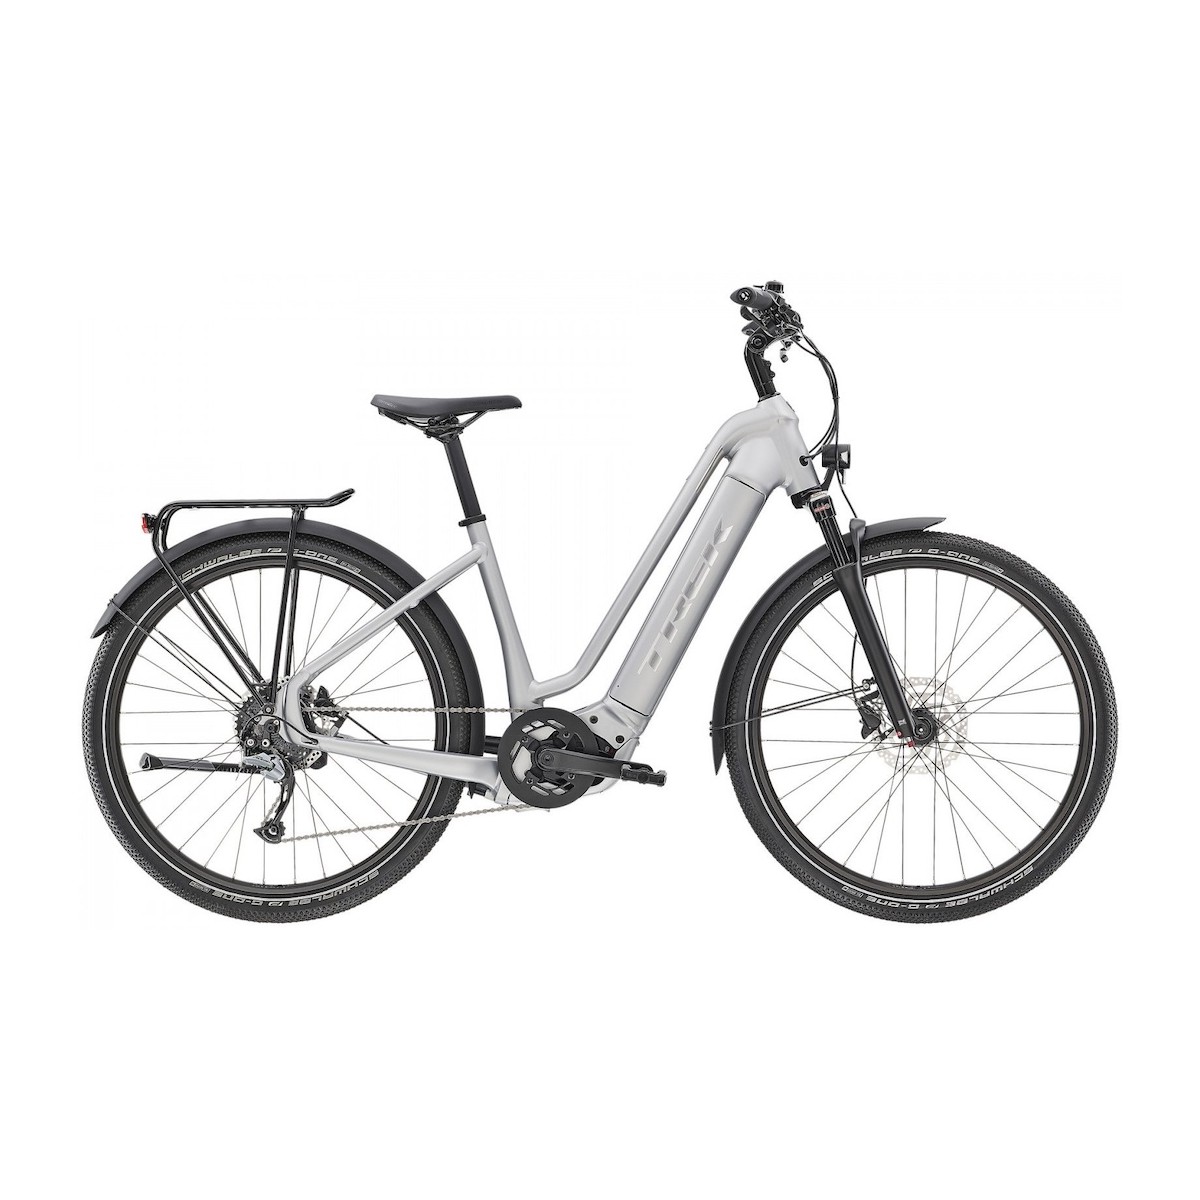 TREK ALLANT+ 7 LOWSTEP electric bicycle - silver 2022